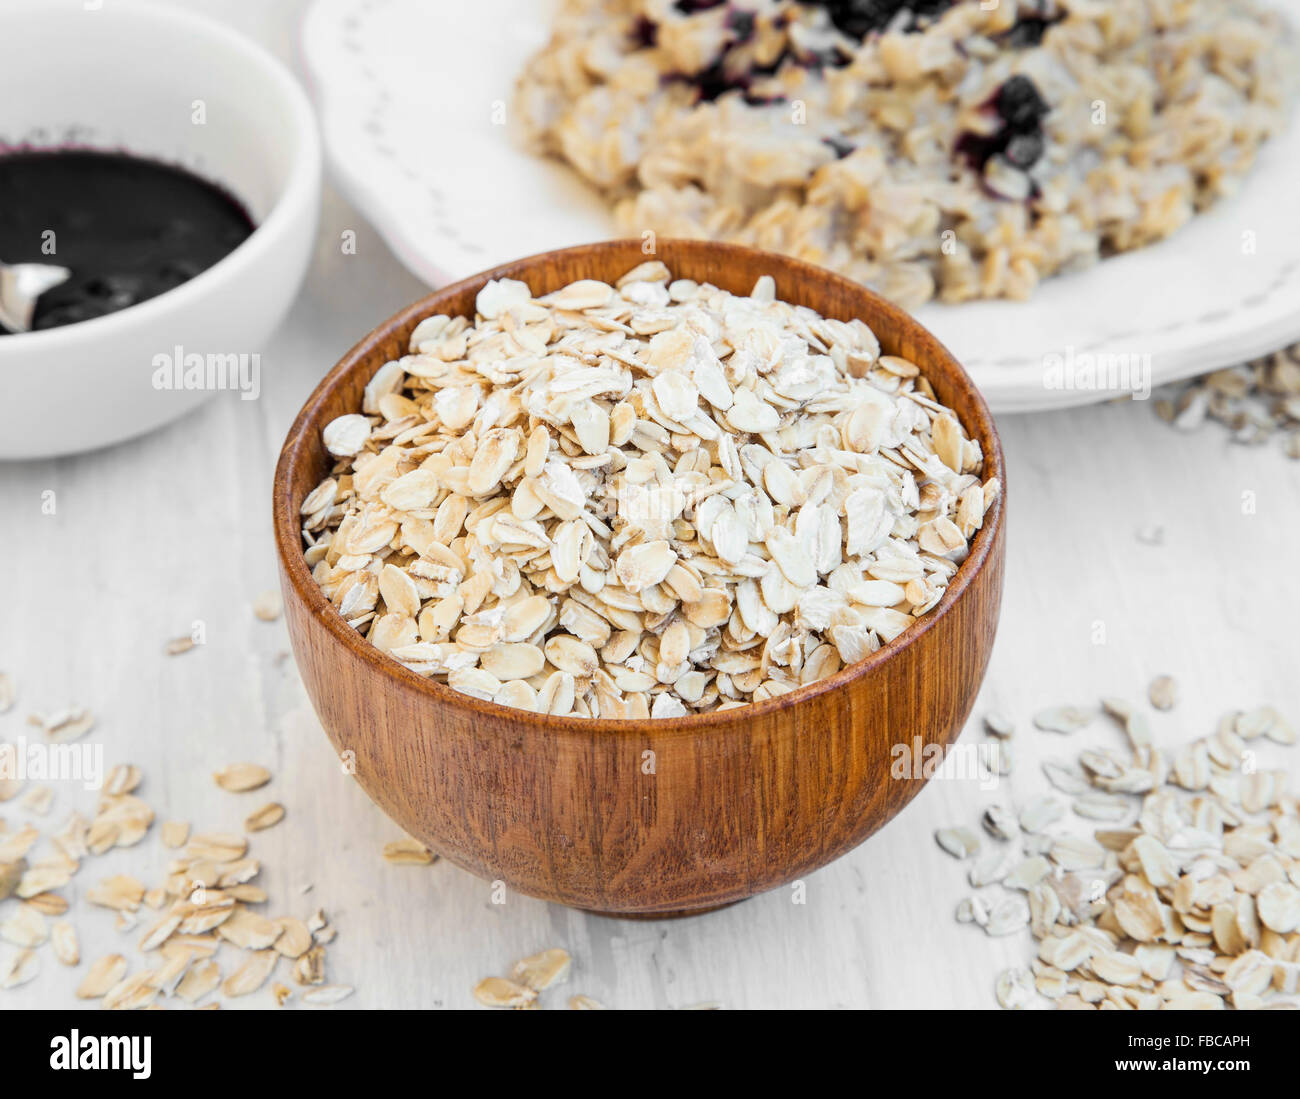 Oatmeal Cereals in a Wooden Bowl and Porridge in the Background Stock Photo